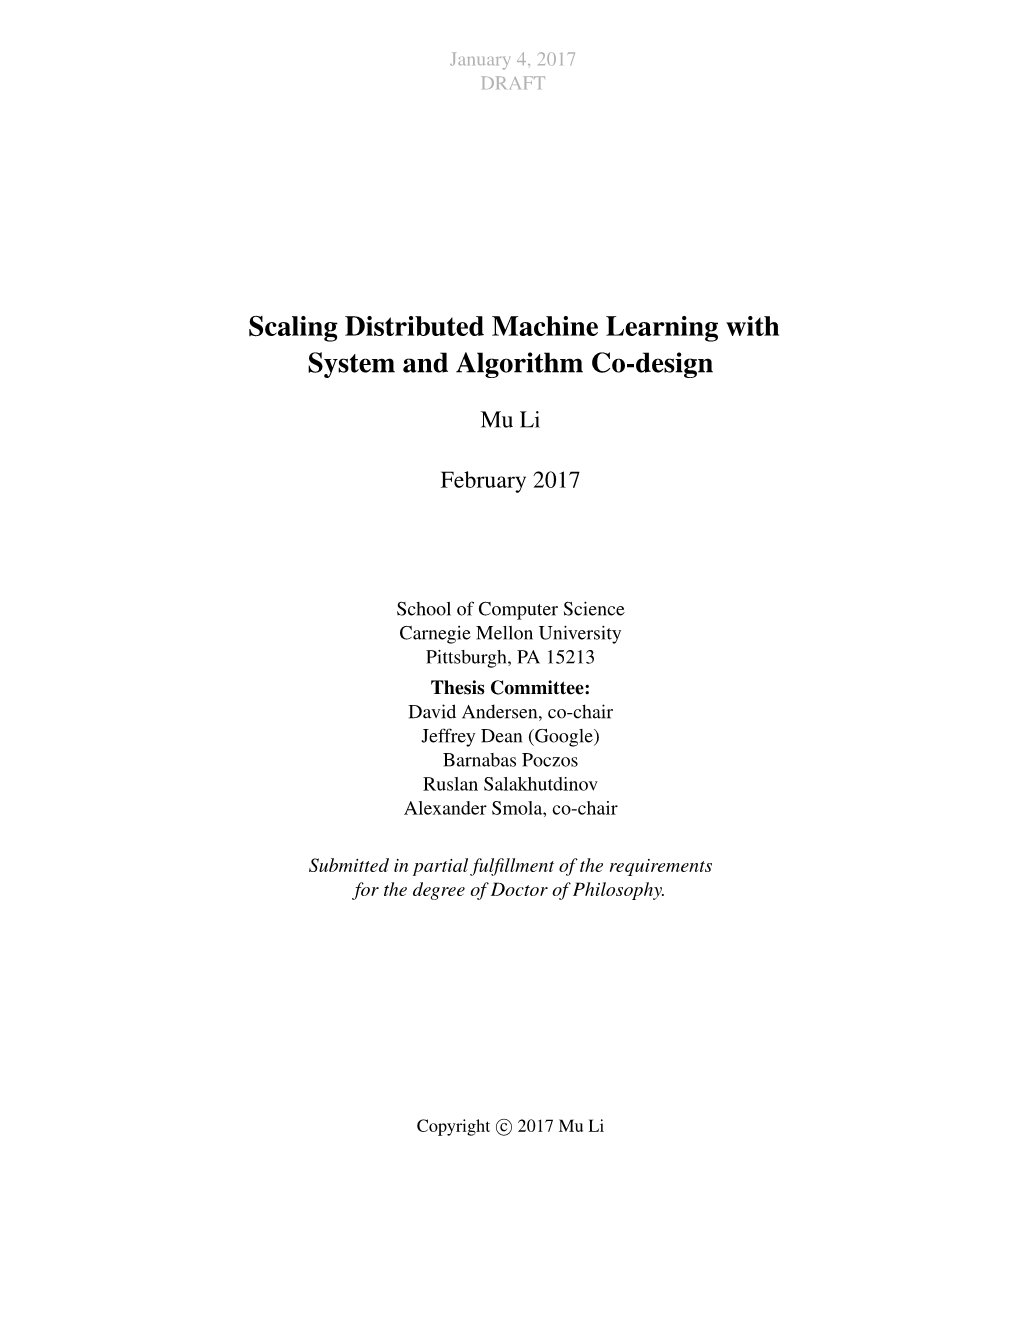 Scaling Distributed Machine Learning with System and Algorithm Co-Design